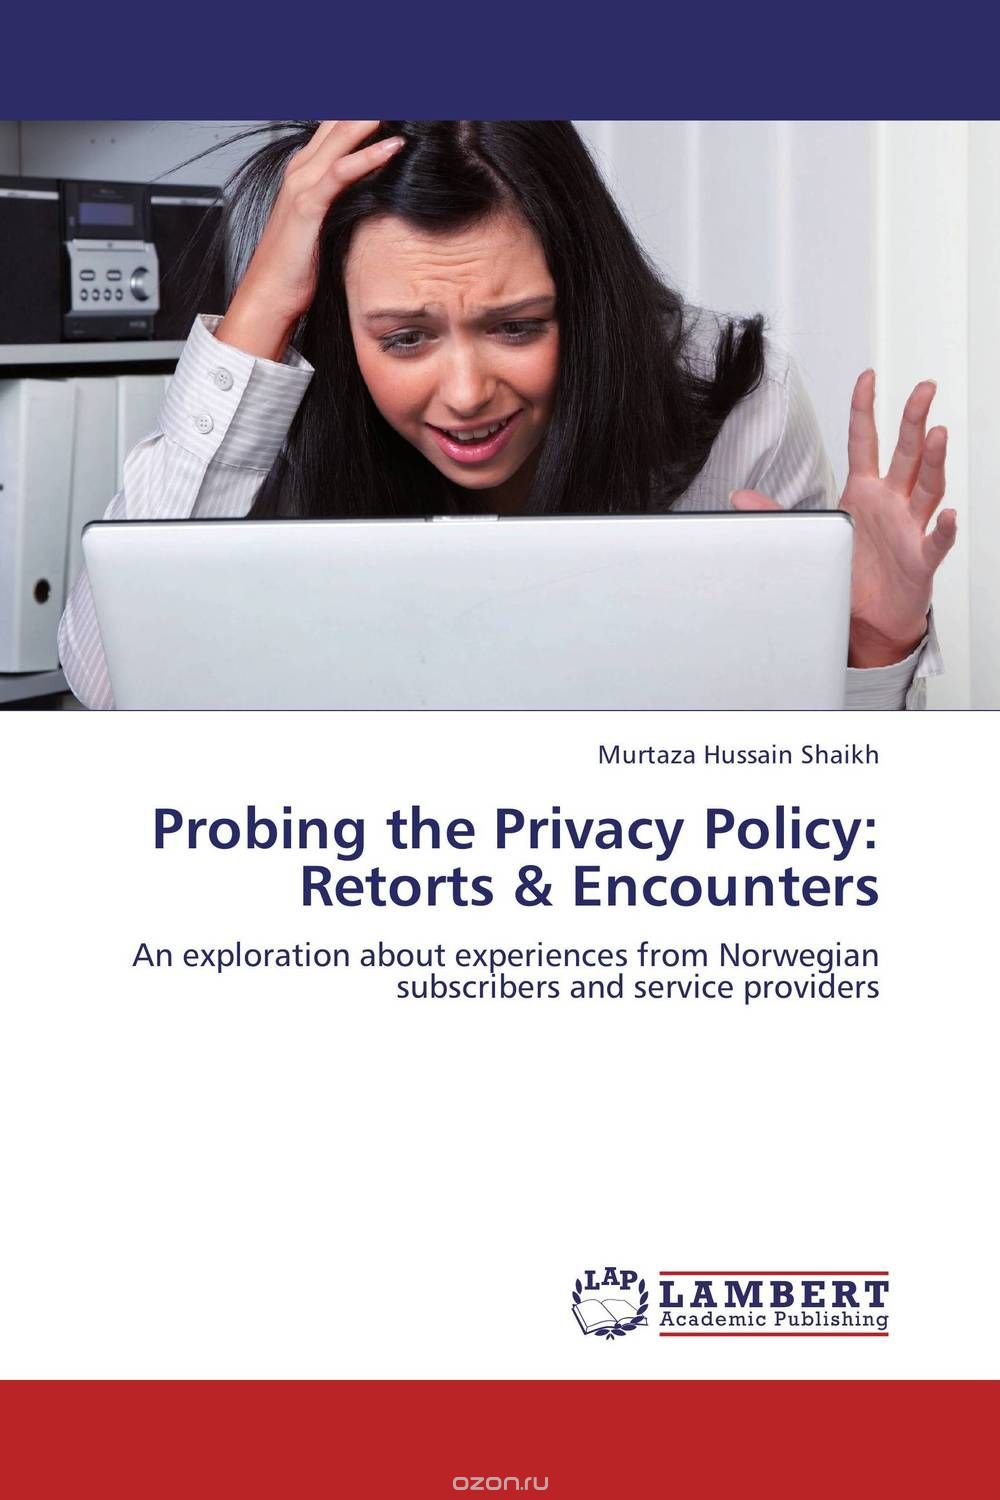 Probing the Privacy Policy: Retorts & Encounters